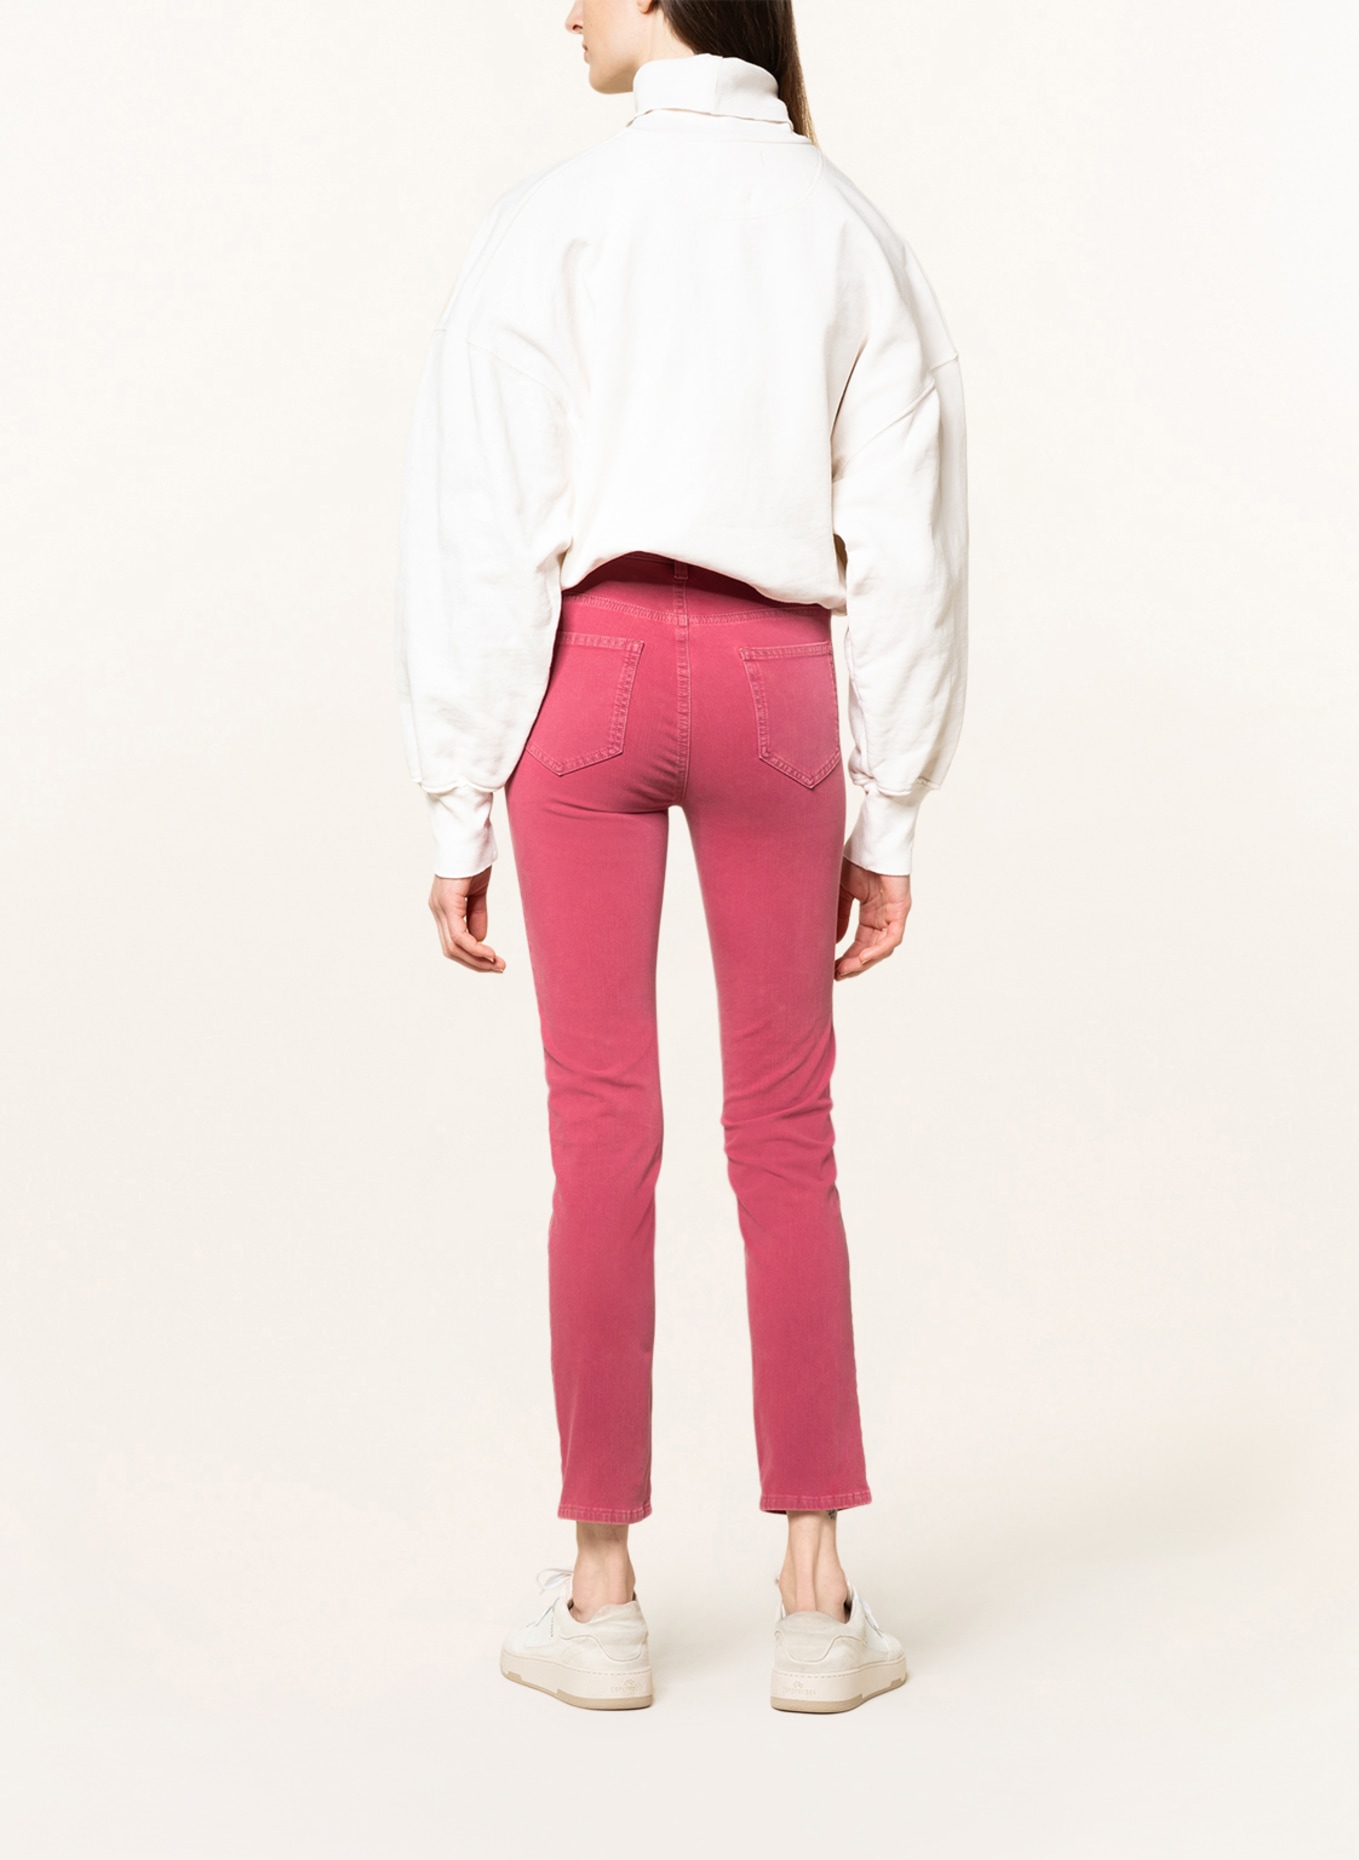 ITEM m6 7/8 skinny Jeans POWER PANTS with shaping effect, Color: 760 moody berry (Image 3)